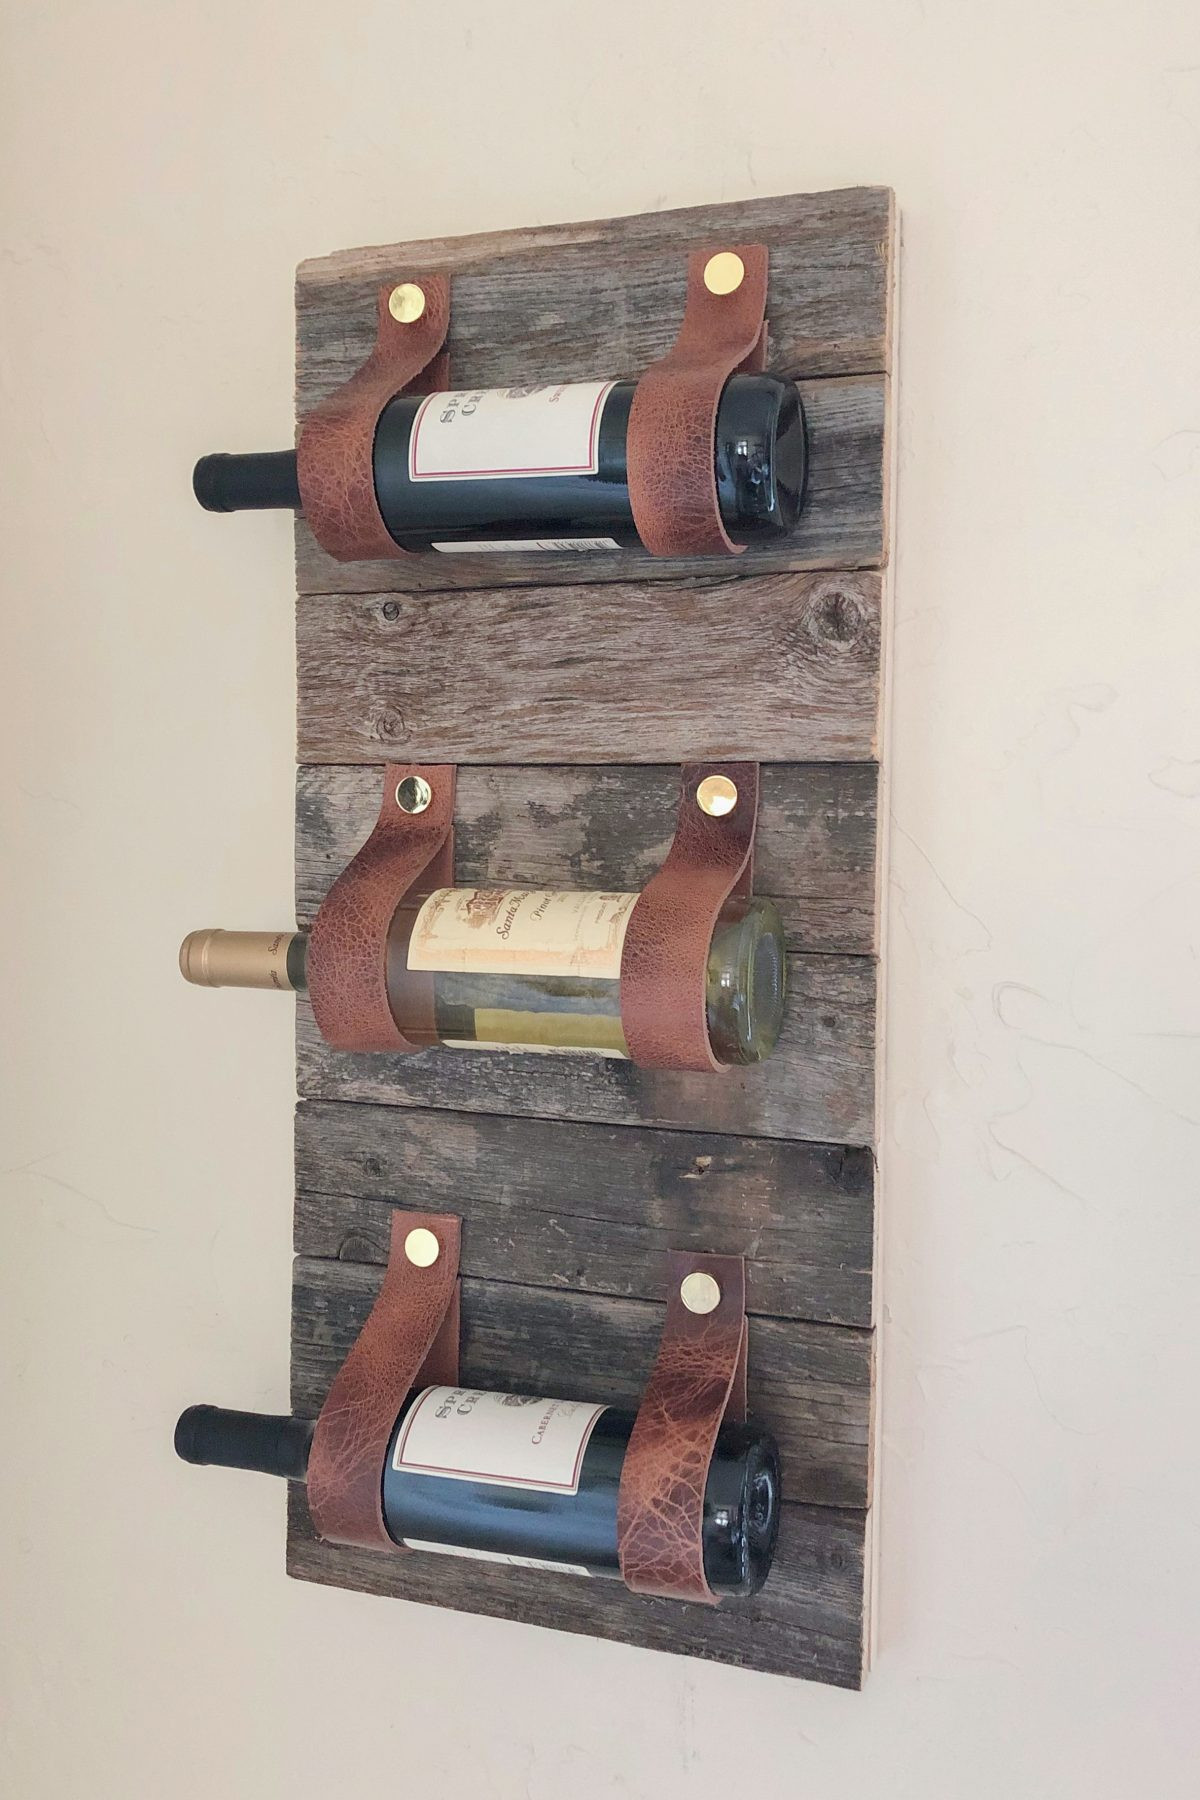 DIY Wooden Wine Rack
 DIY Wood and Leather Wine Rack Shanty 2 Chic